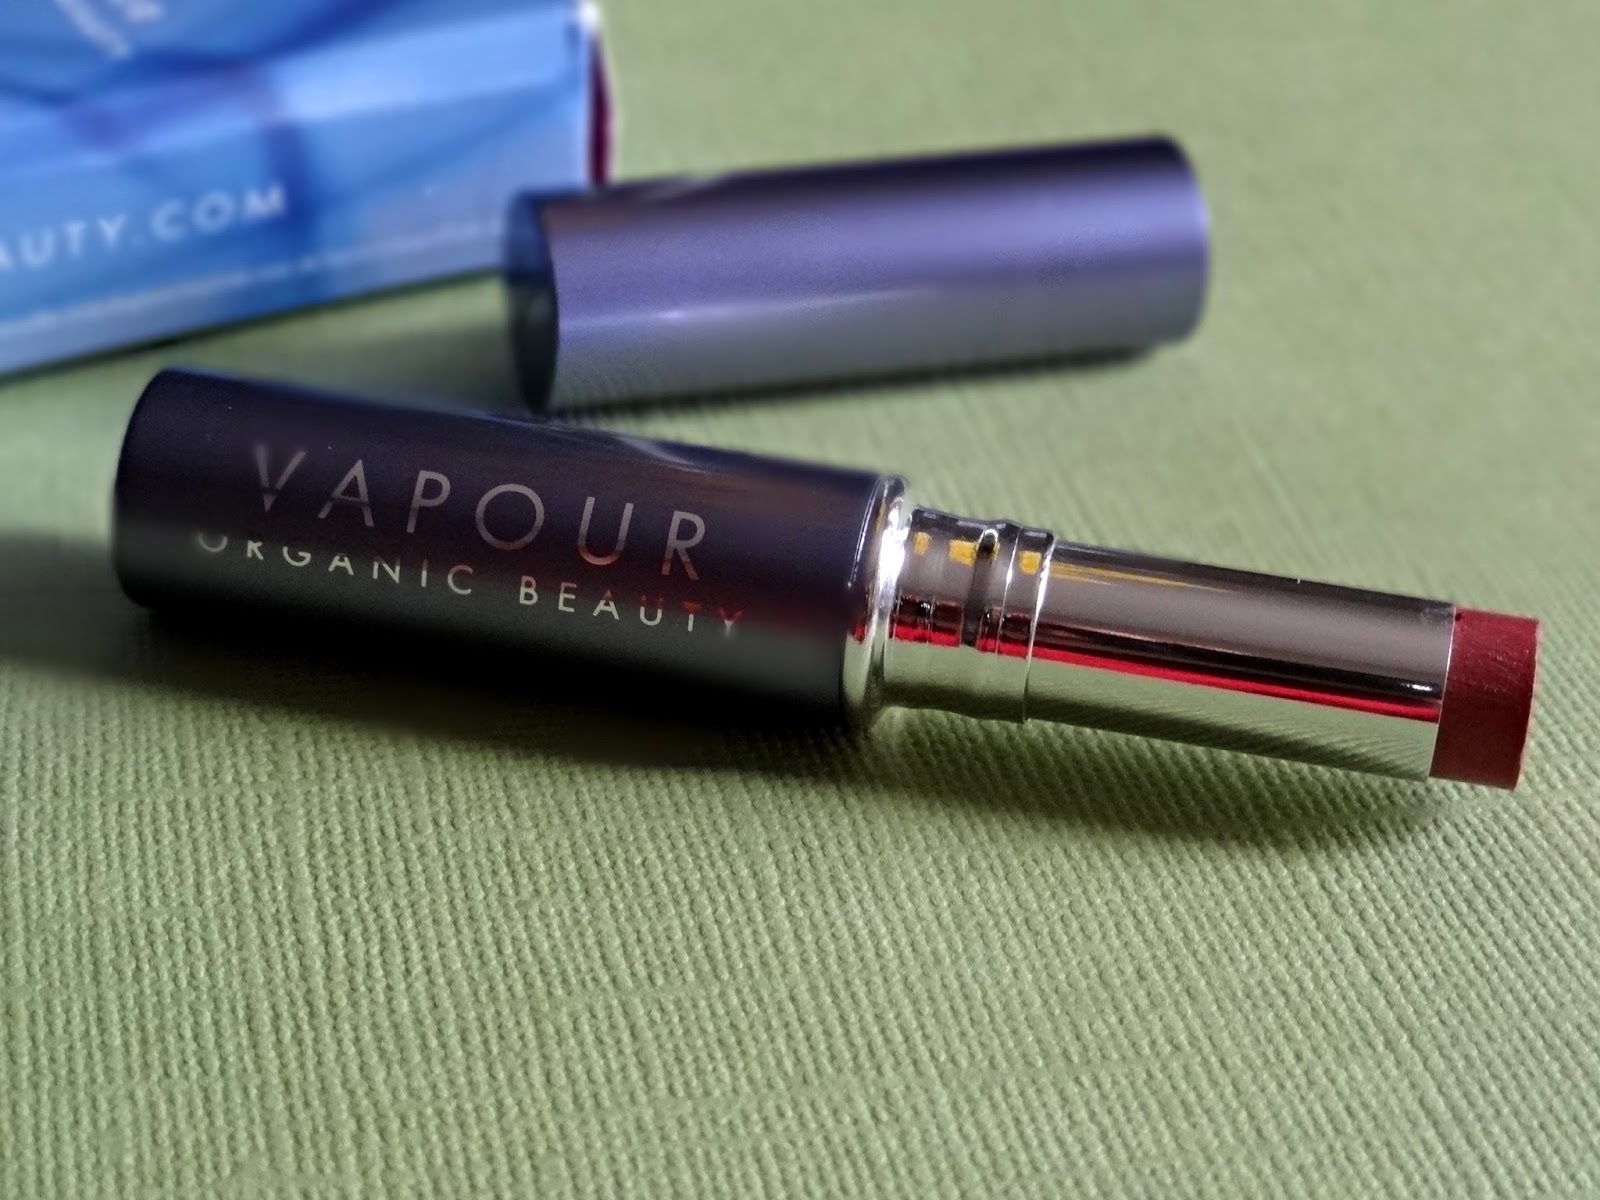 Vapour Organic Beauty Siren Lipstick in Tempt Review, Photos, Swatches